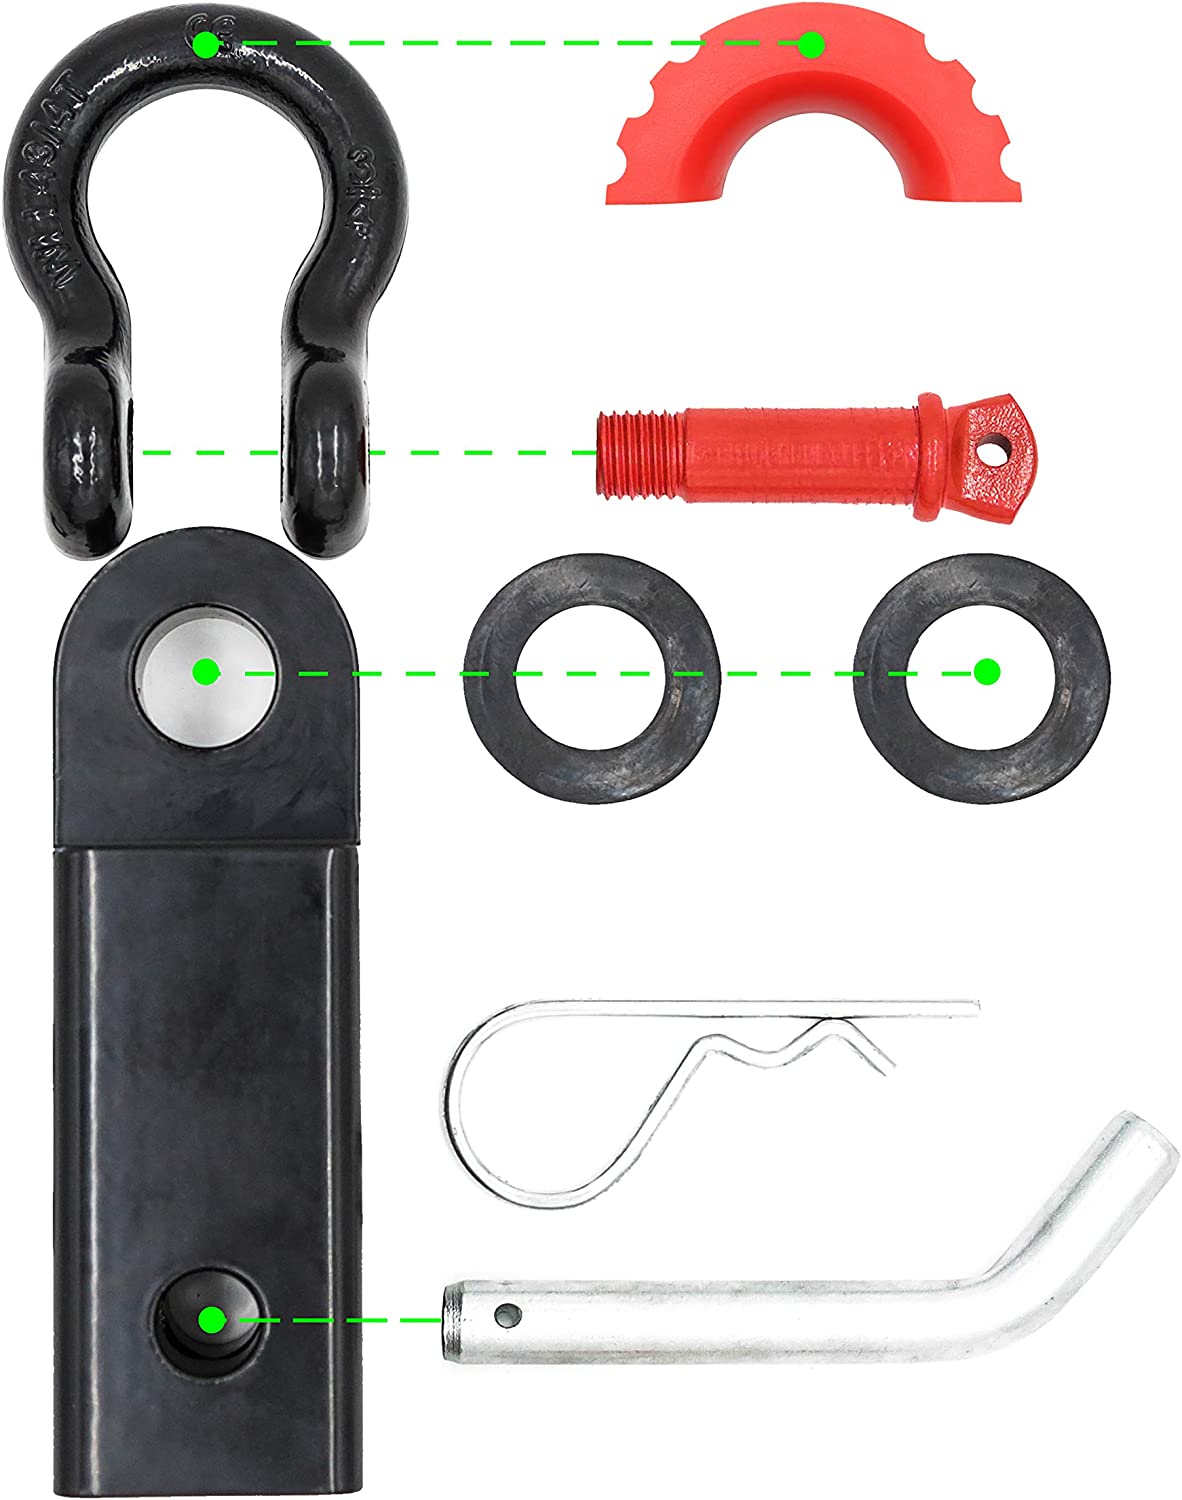 Forged Shackle Hitch Receiver w/ Isolator & Washers - 42,000 Lbs